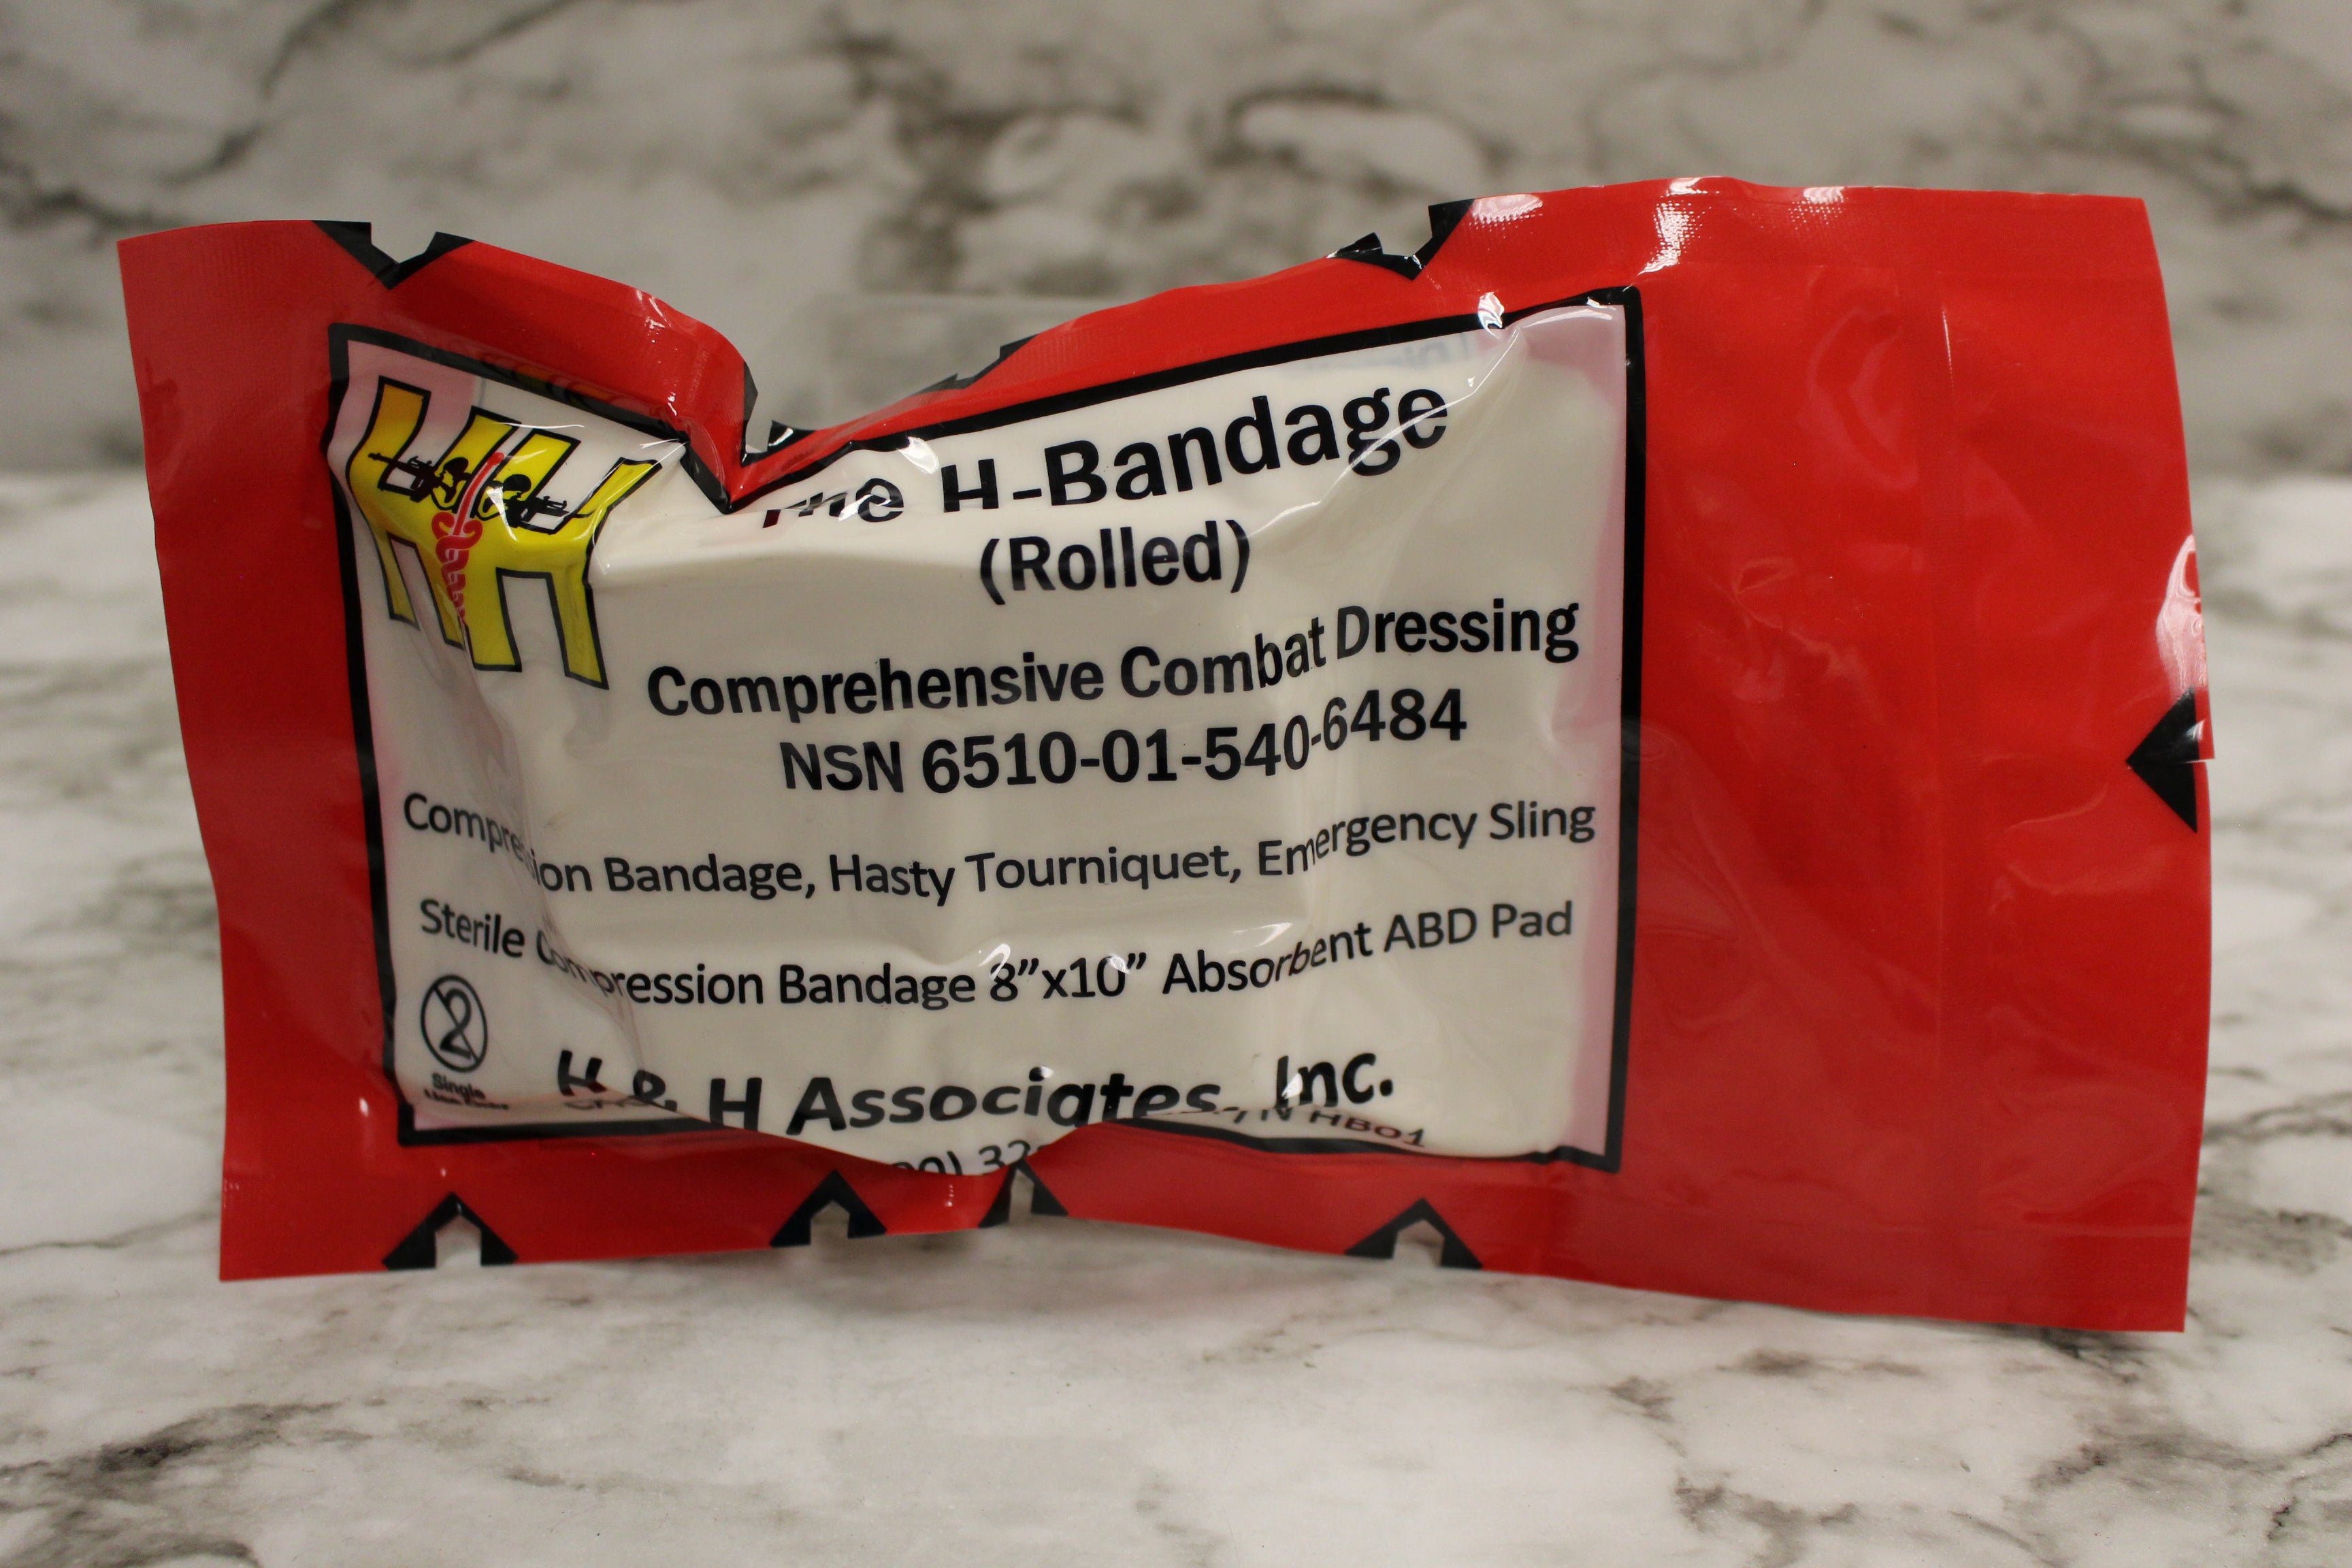 Rolled H-Bandage Comprehensive Combat Dressing - 6510-01-540-6484 - Ne –  Military Steals and Surplus